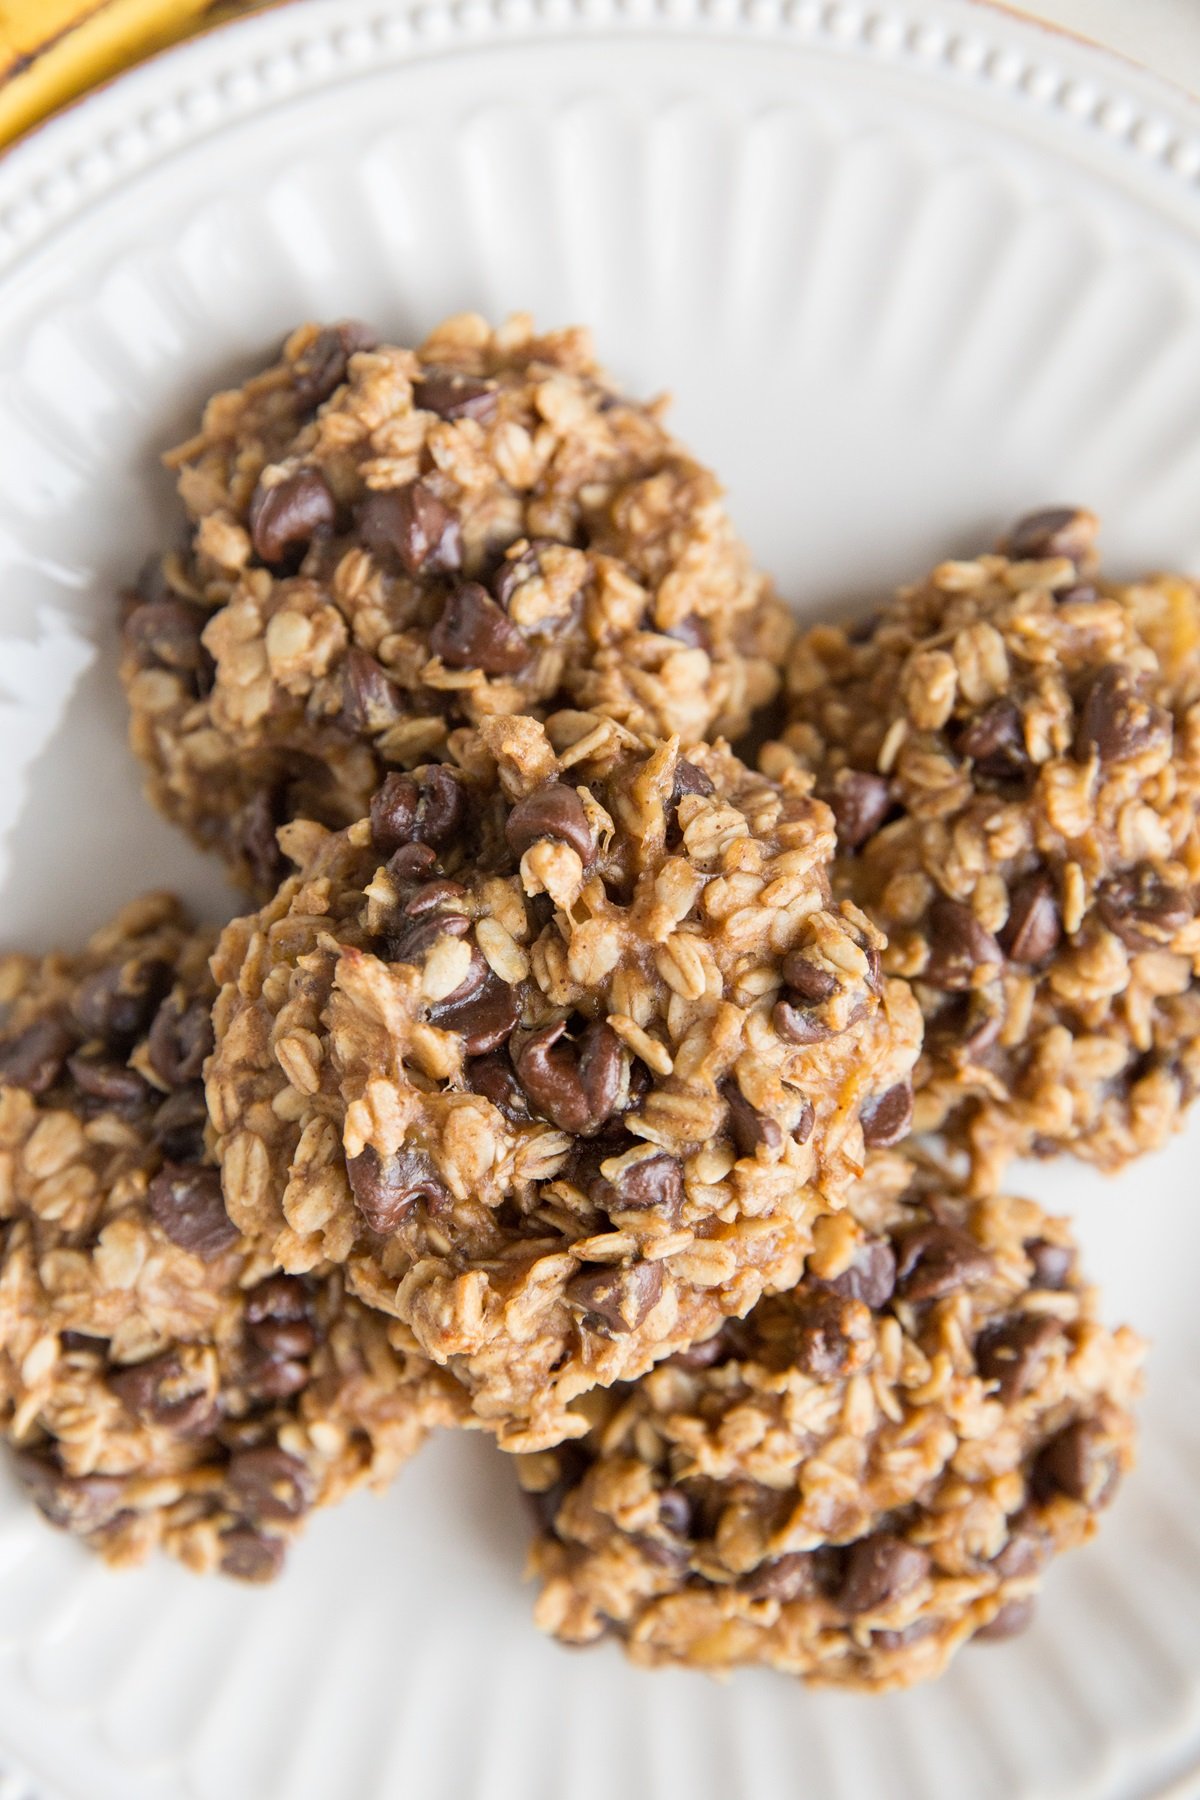 3-Ingredient Oatmeal Cookies with chocolate chips - a healthier cookie recipe with no added sweetener. Vegan, gluten-free, dairy-free